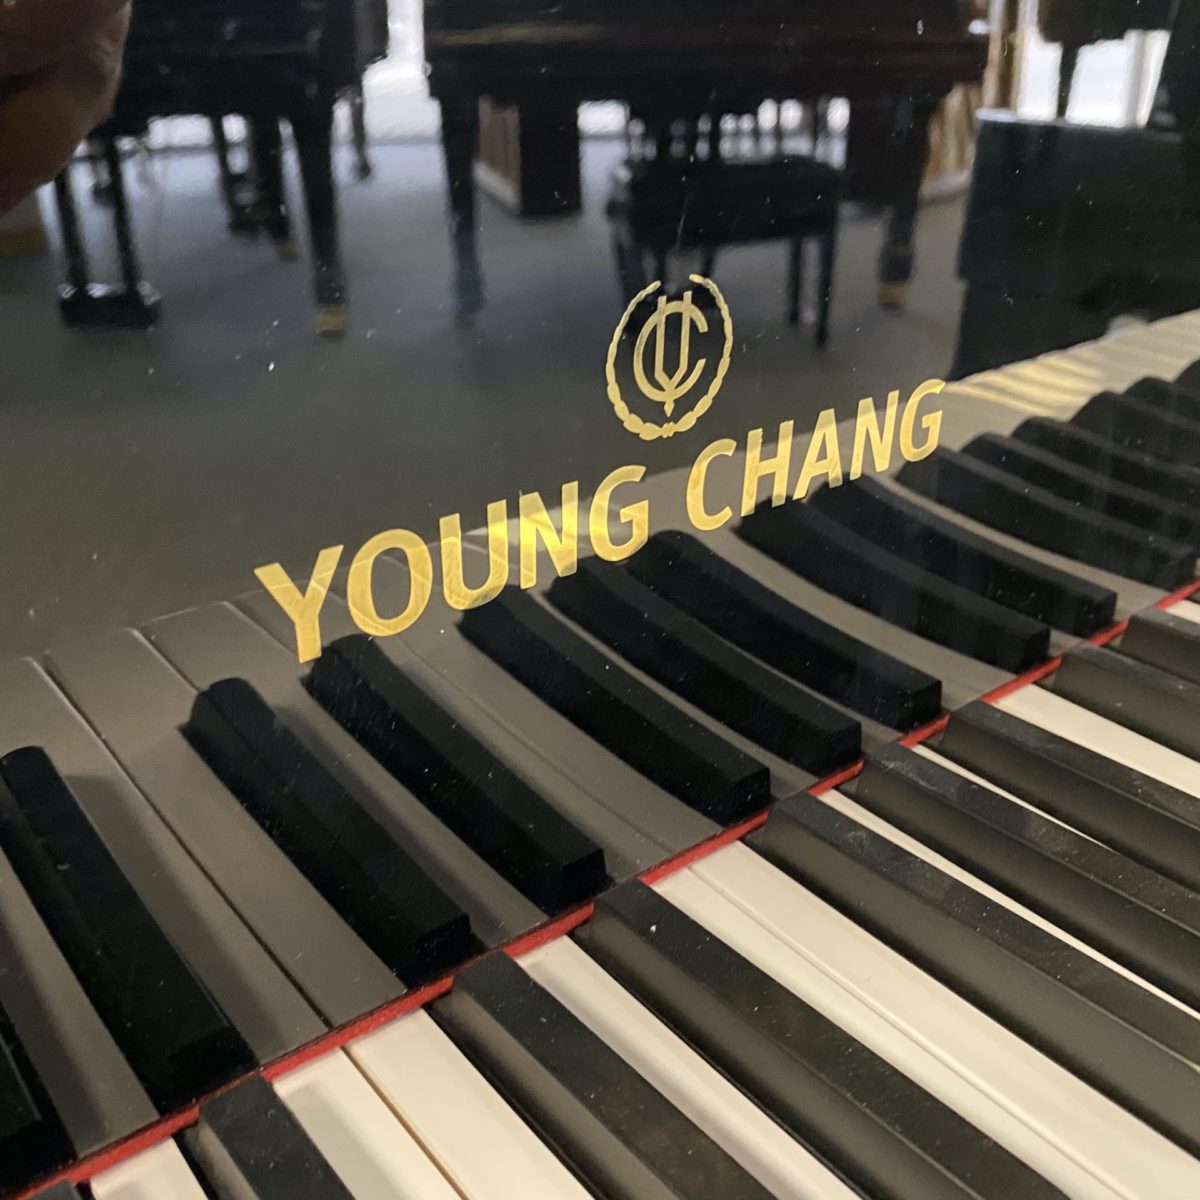 what is the price for a new young chang baby grand piano